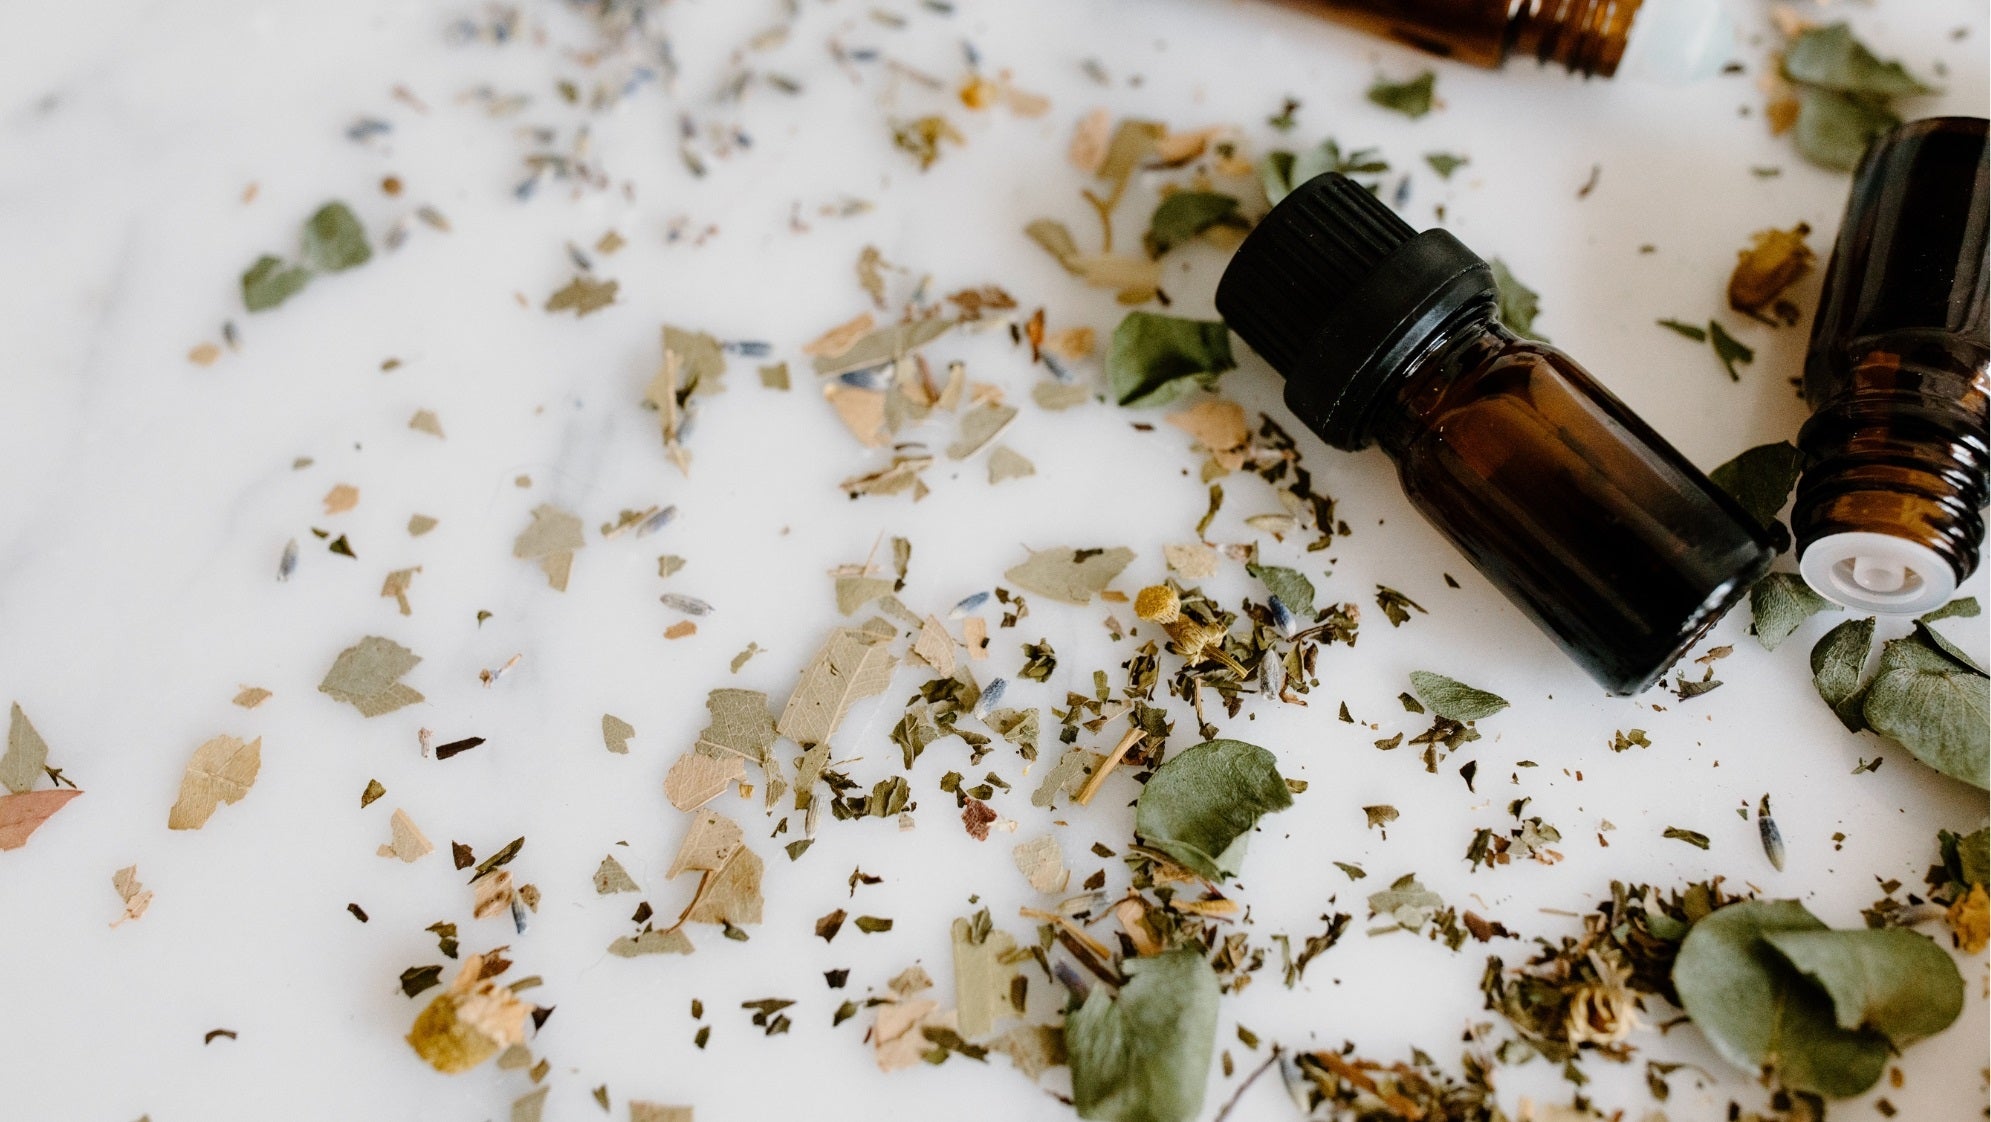 Are All Essential Oils Truly Made Equal?